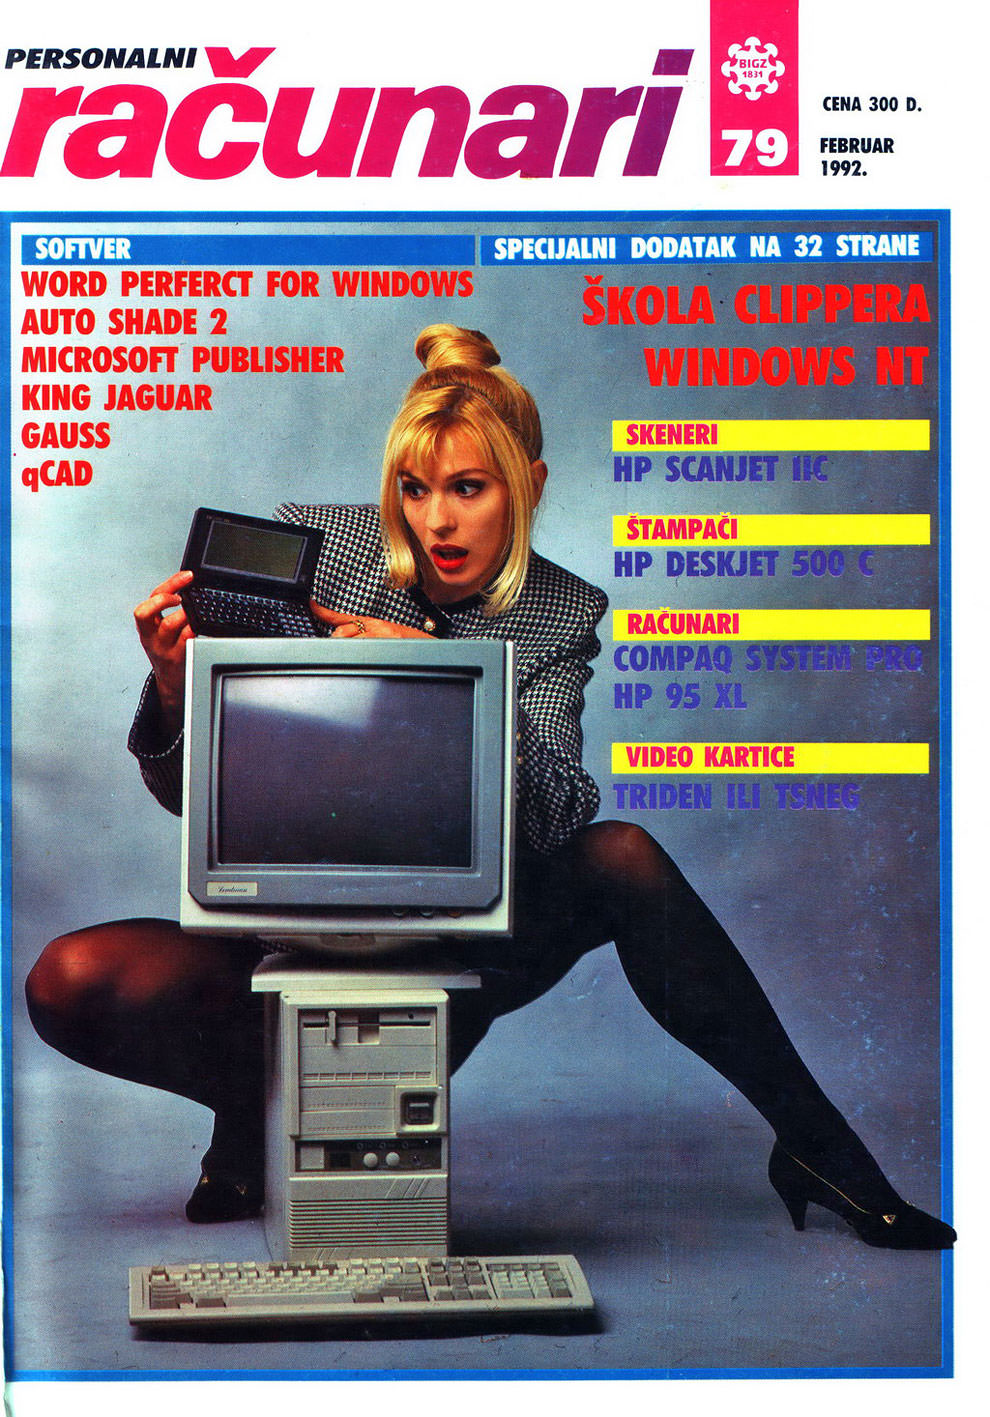 Sensual Vintage Yugoslavian Computer Magazine Covers Girls Of The 1980s-90s